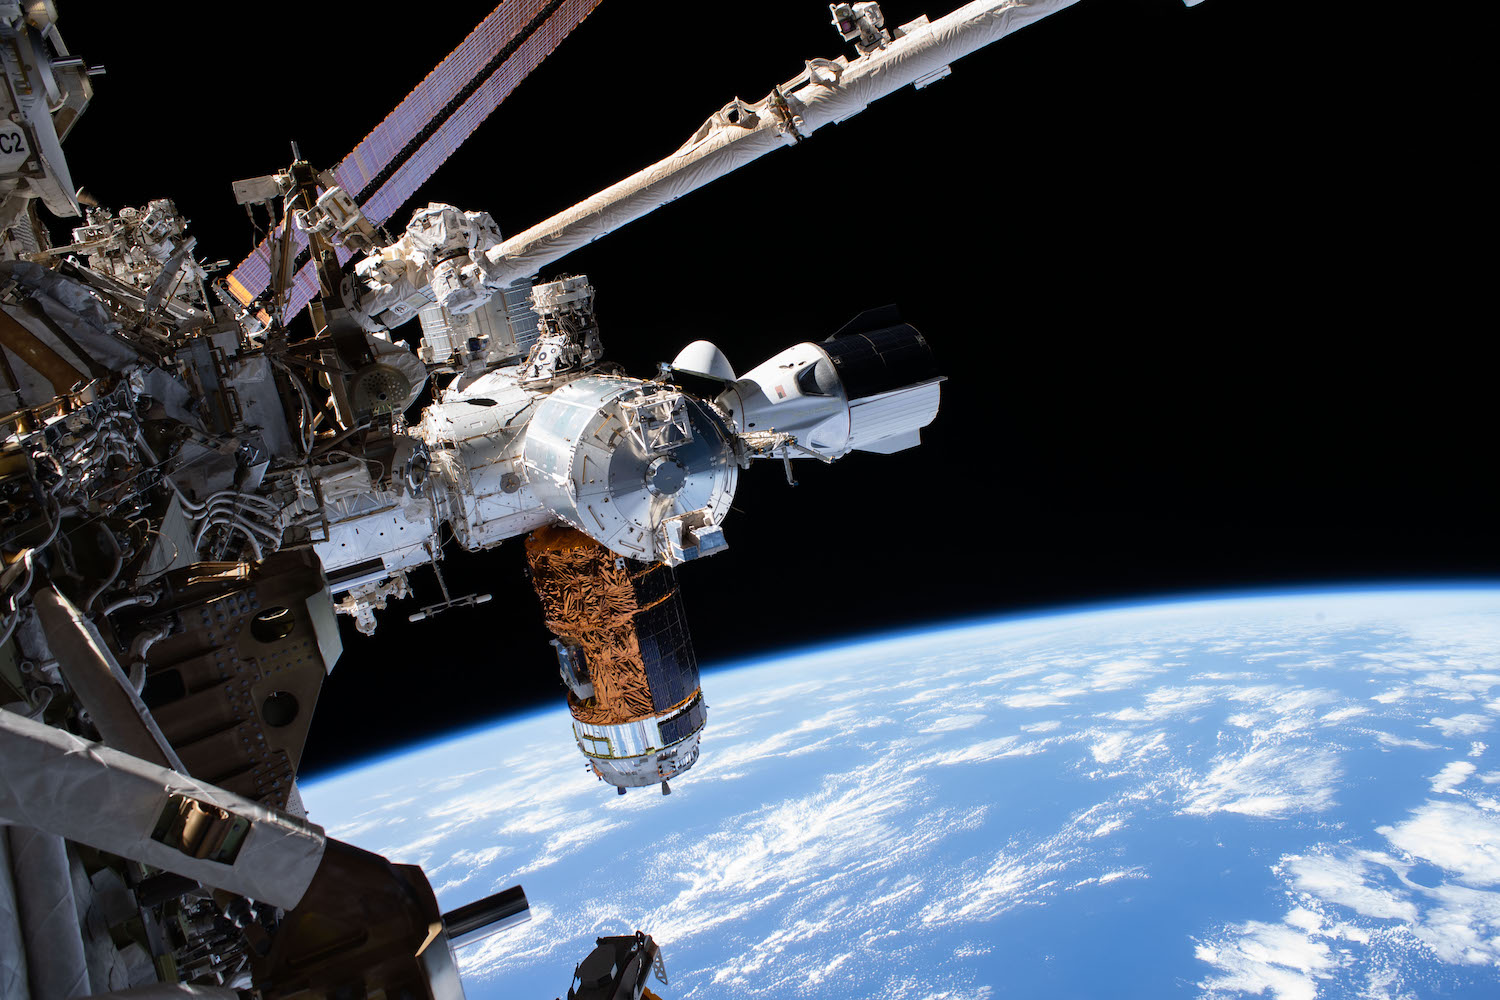 One-small-step-for-bitcoin-–-spacechain-secured-transfer-from-international-space-station